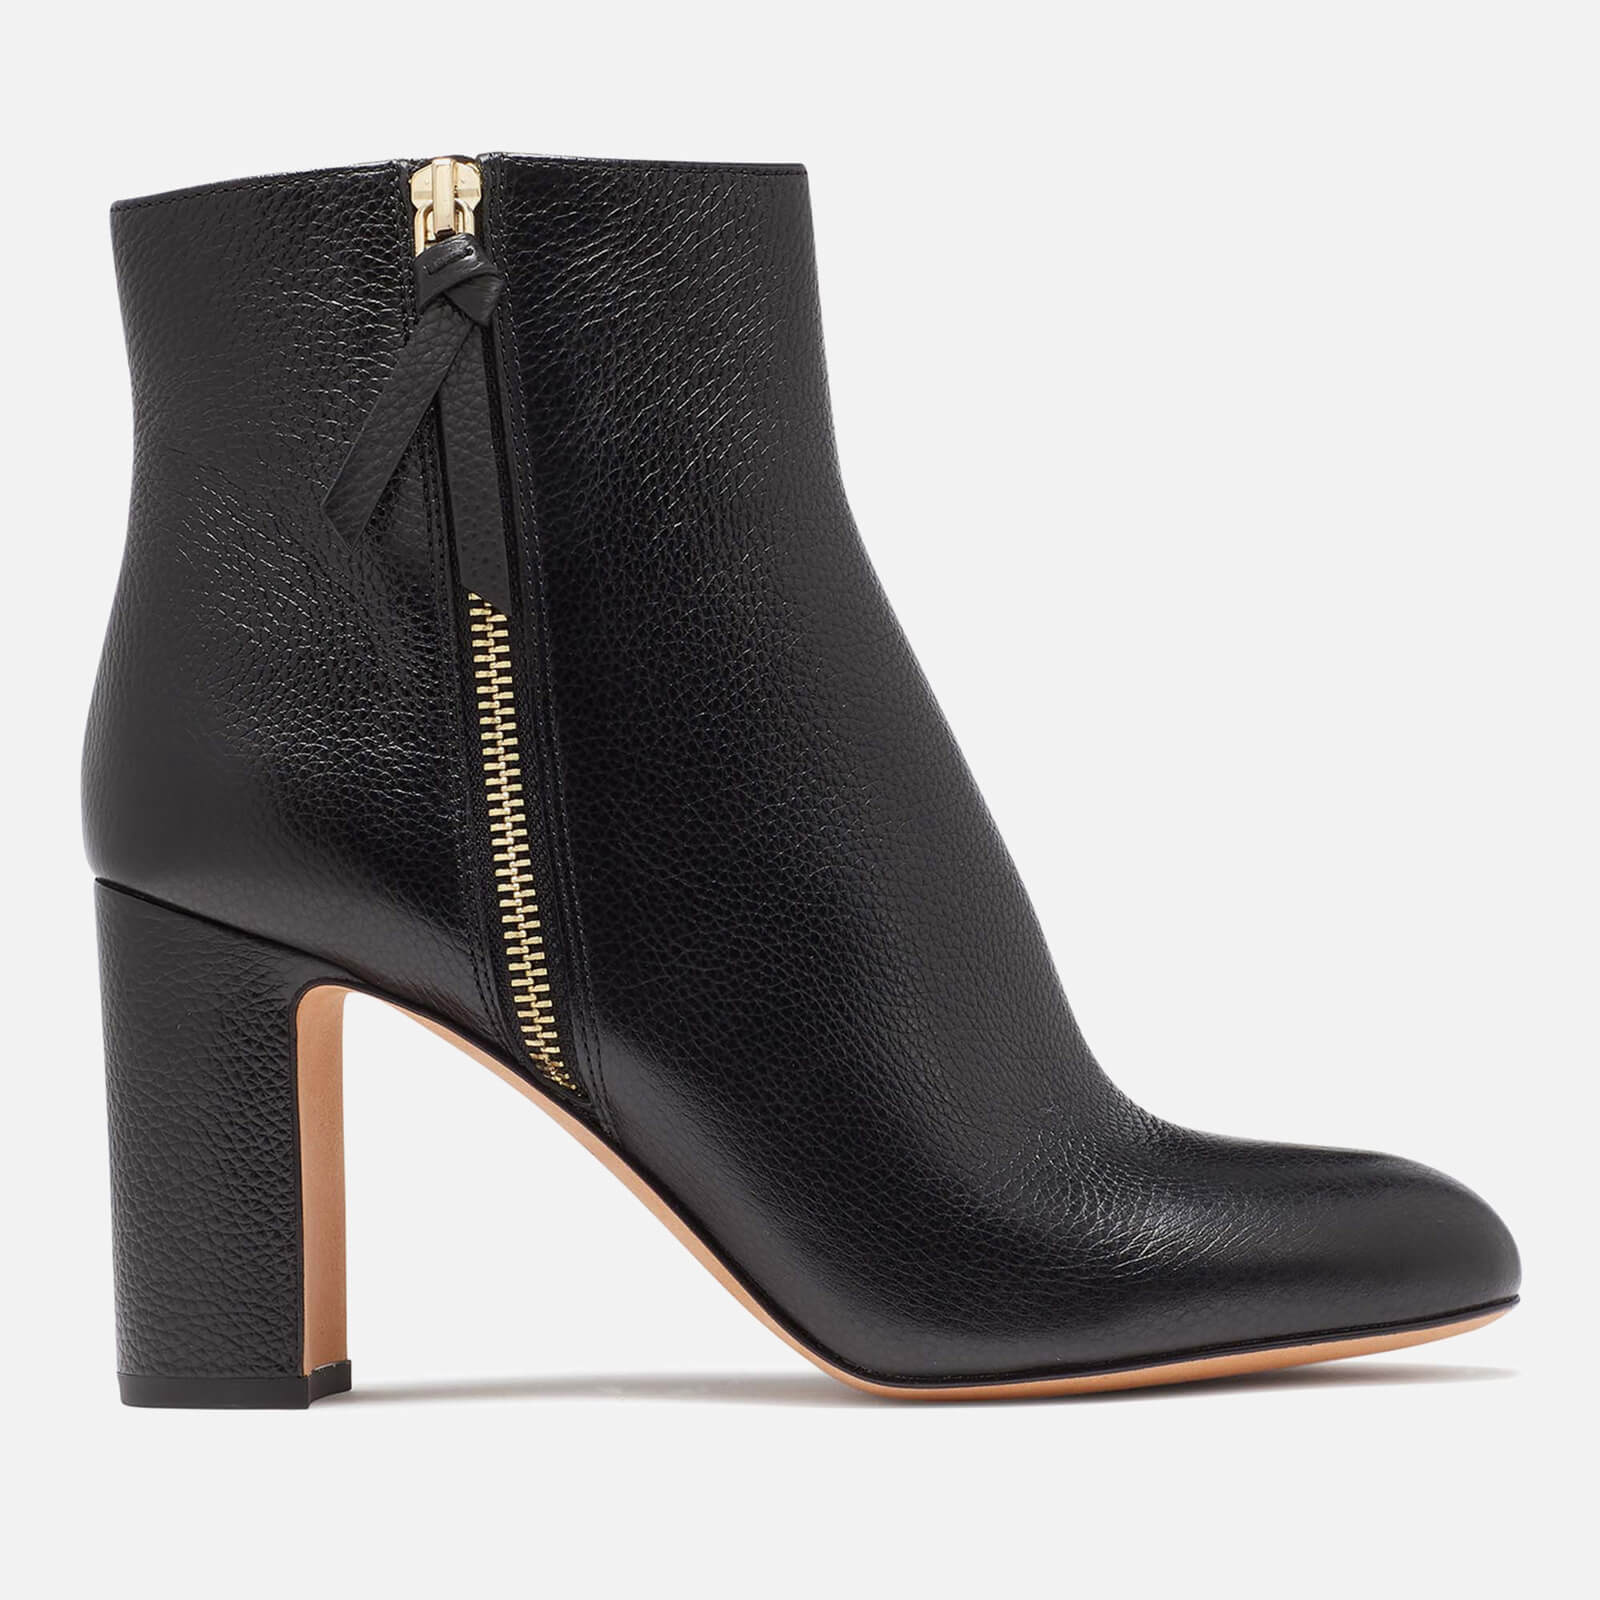 Kate Spade New York Women’s Leather Heeled Ankle Boots